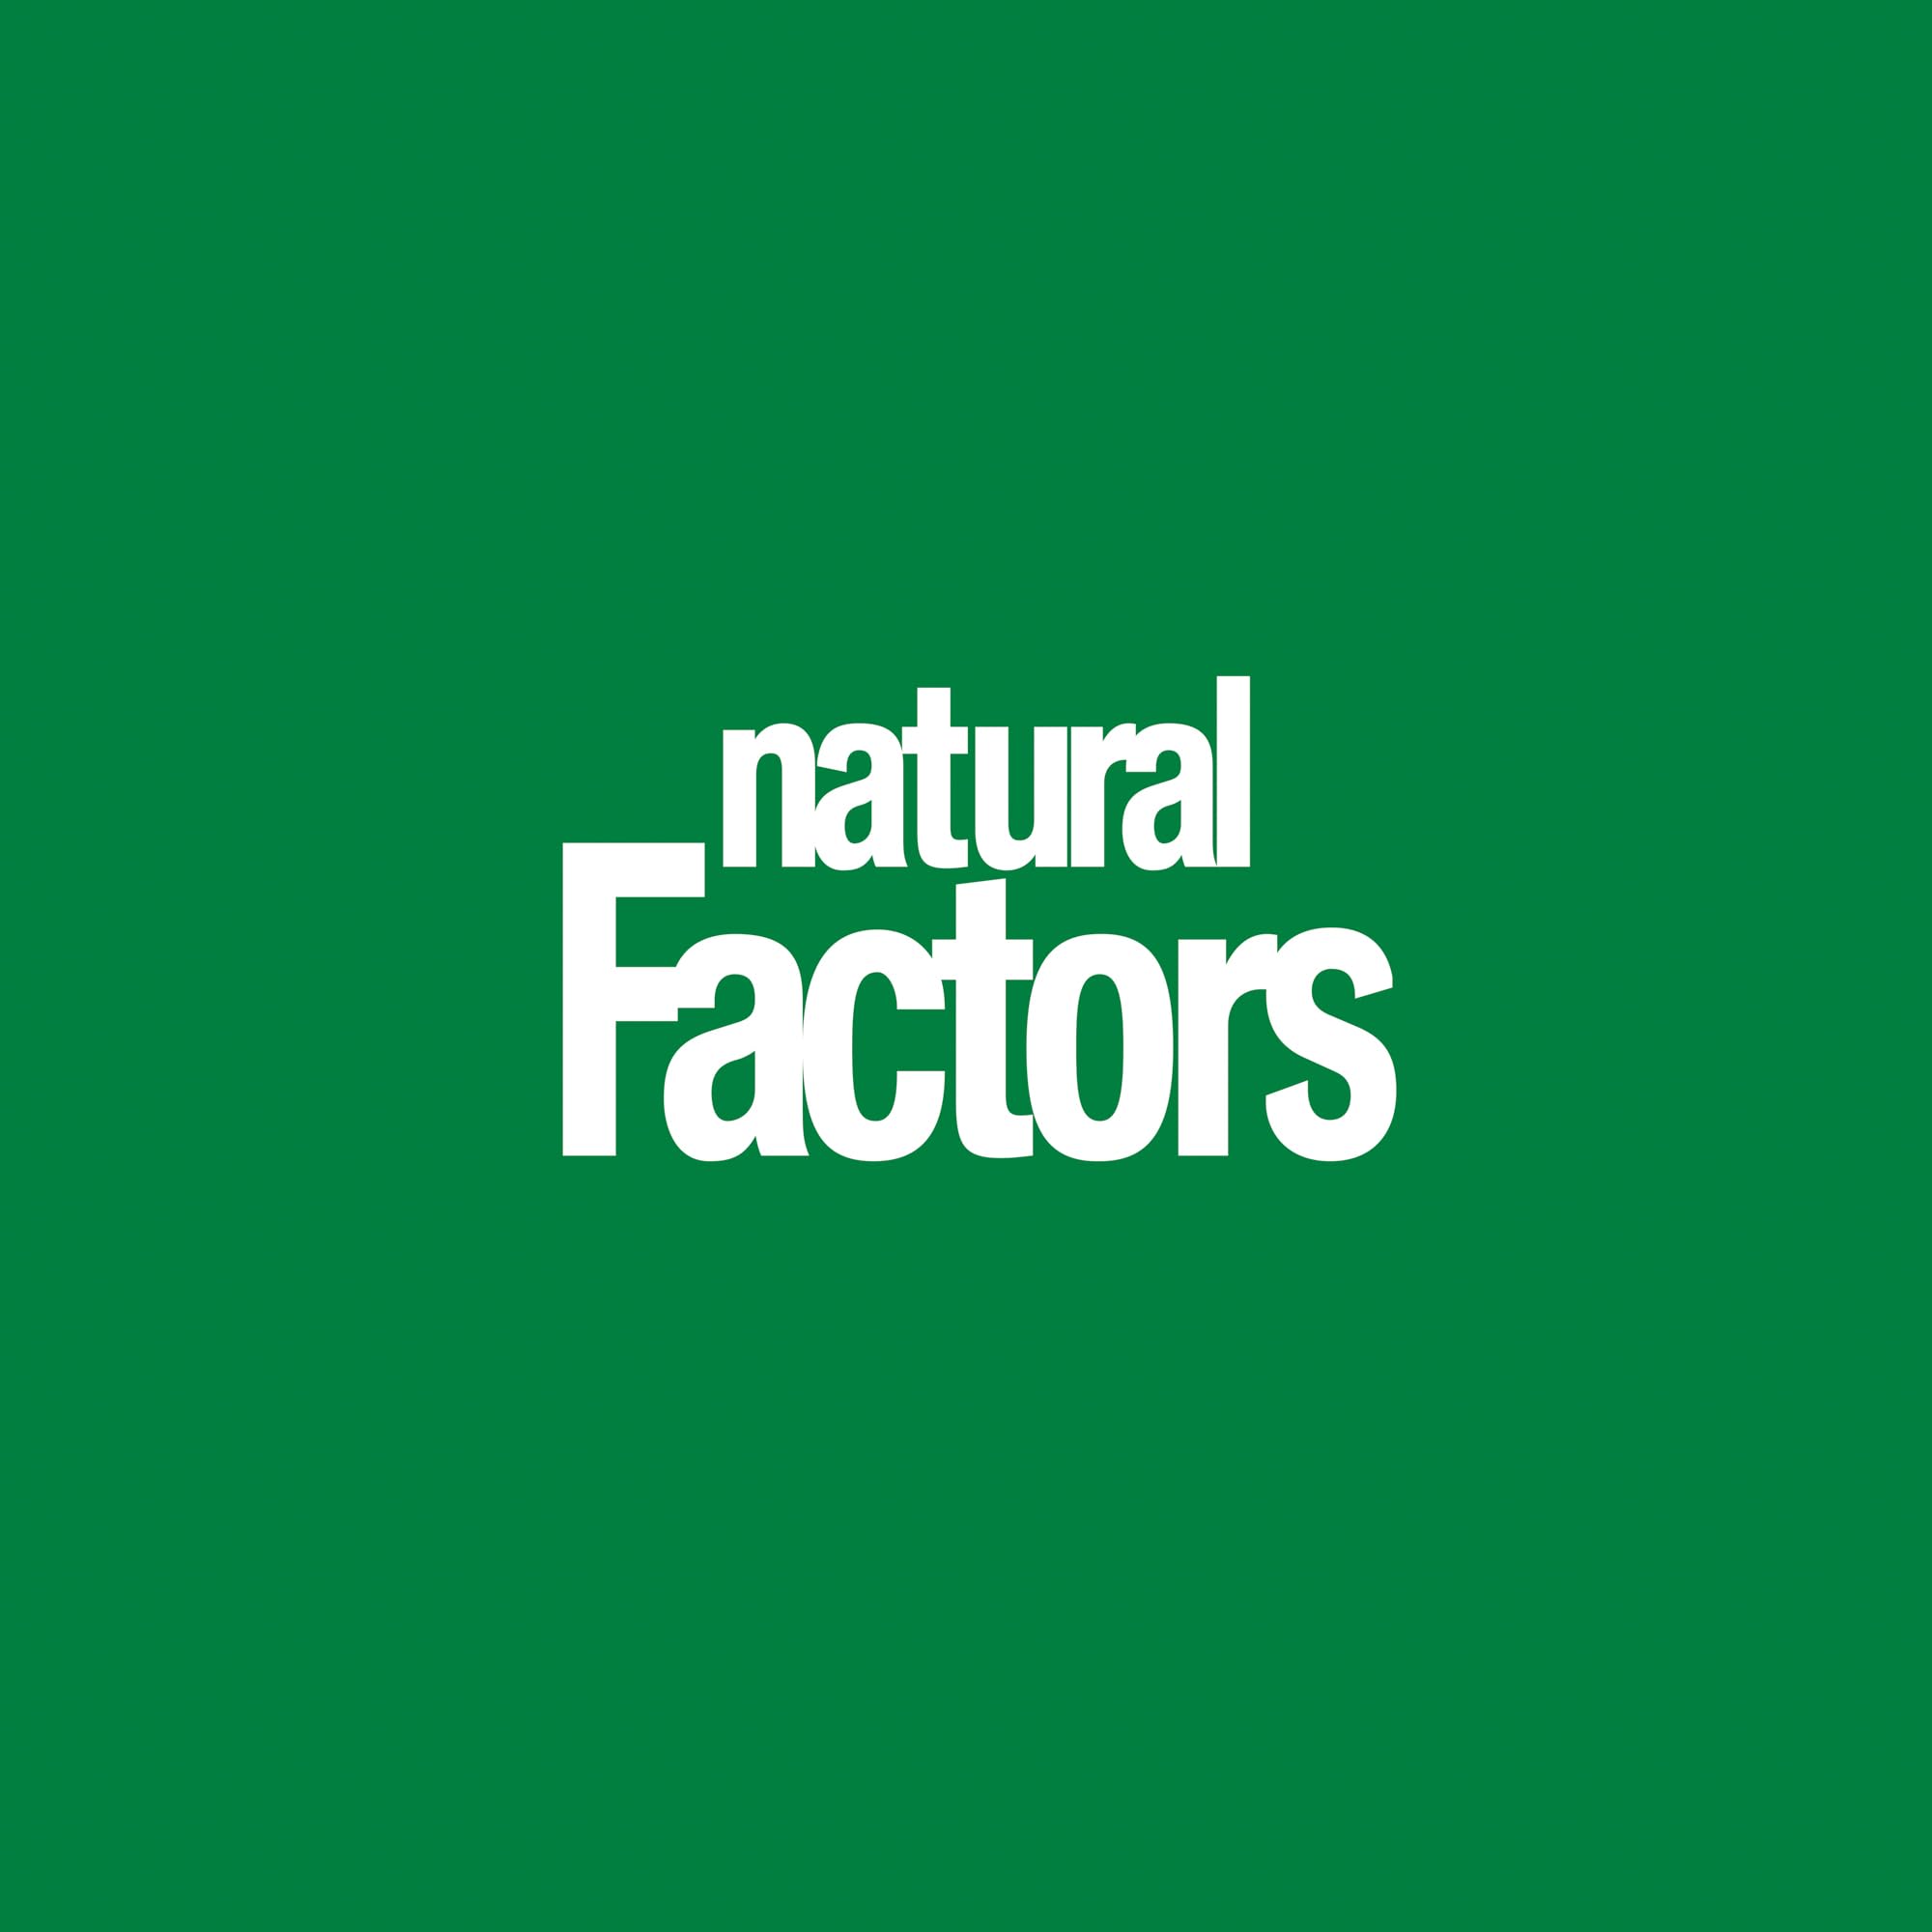 Natural Factors, Women's 50+ Multivitamin & Mineral, 1 Serving Contains Nutrition Equivalent to ½ lb of Veggies, 120 Count (Pack of 1)